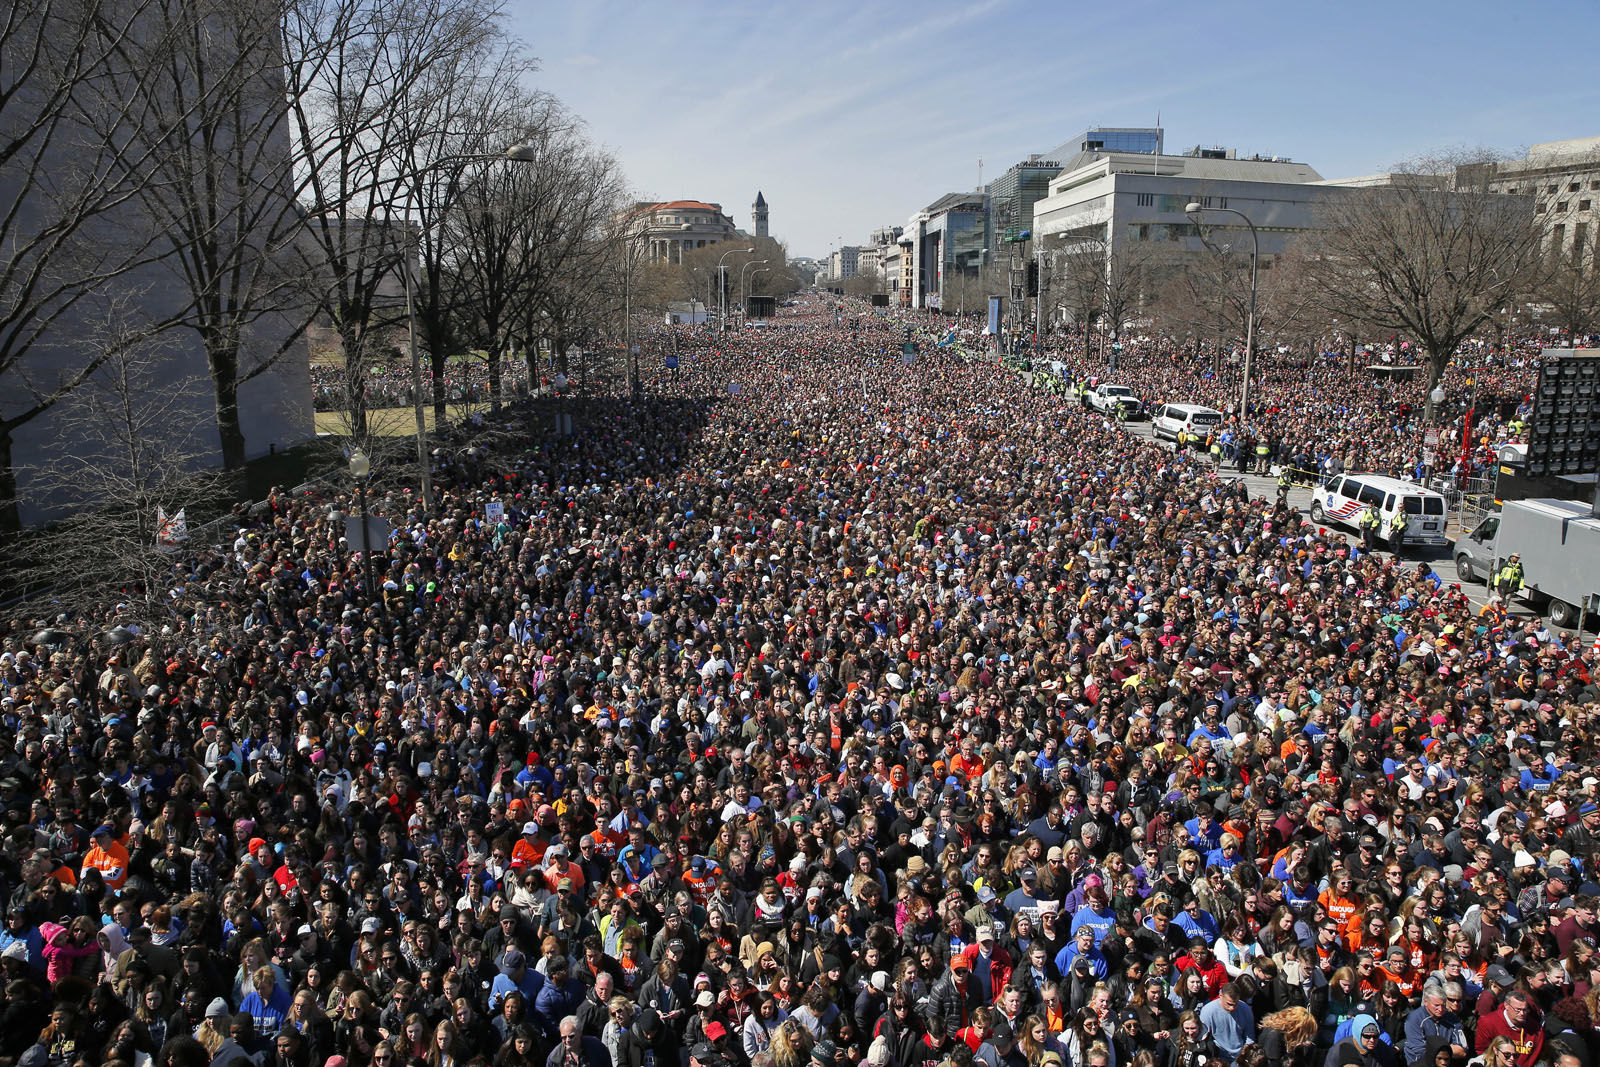 Looking west away from the stage, the crowd fills Pennsylvania Avenue during the "March for Our Lives" rally in support of gun control, Saturday, March 24, 2018, in Washington. (AP Photo/Alex Brandon)